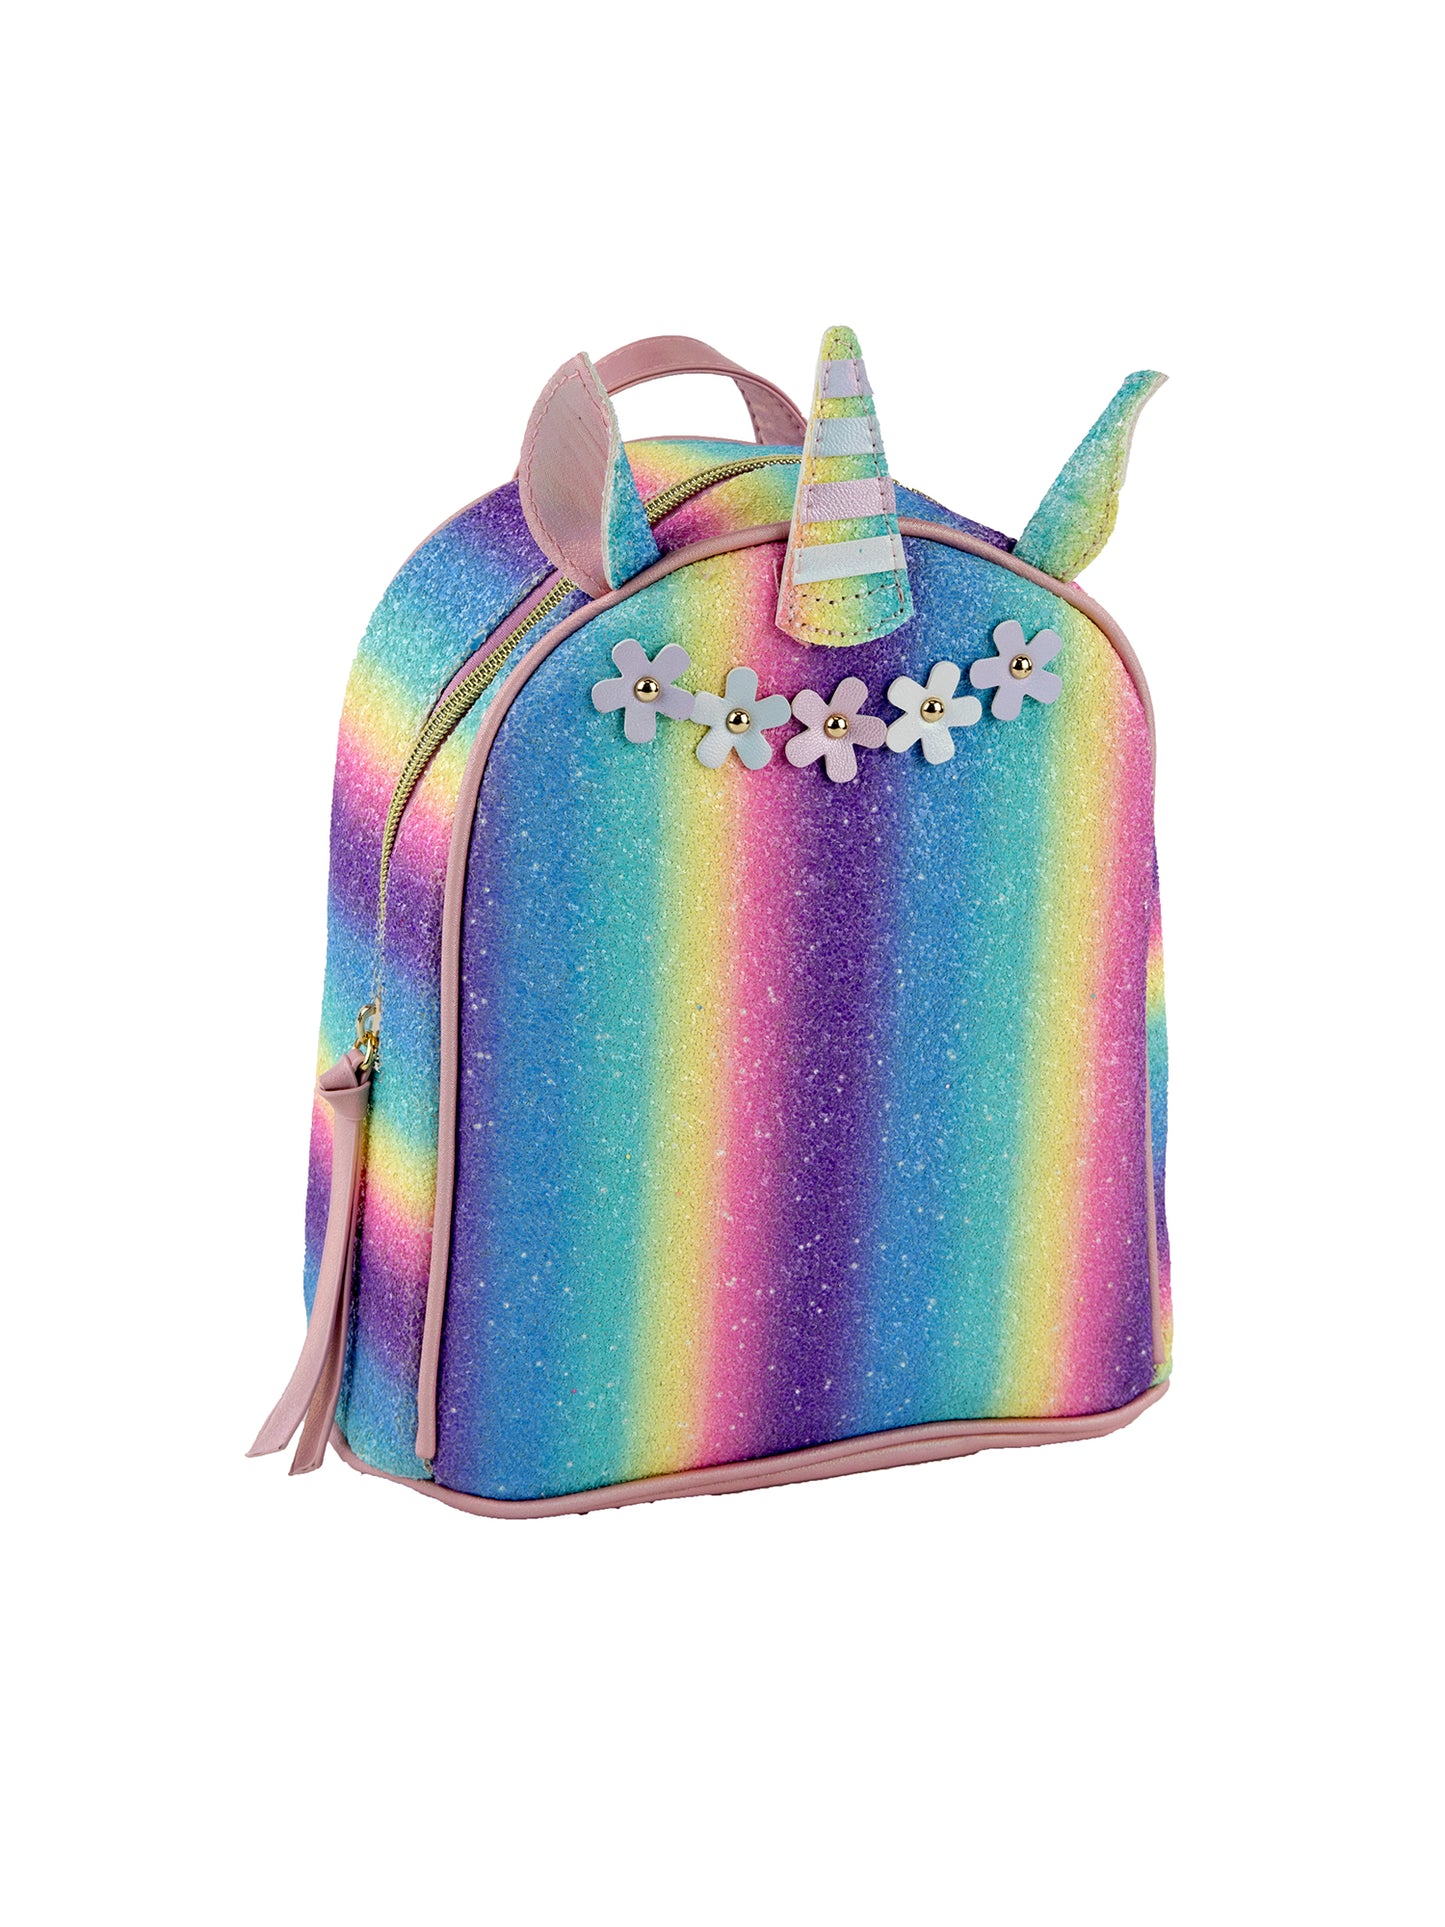 Under One Sky Kid's Mini Critter Faux Fur Unicorn Backpack - ShopStyle  Girls' Bags